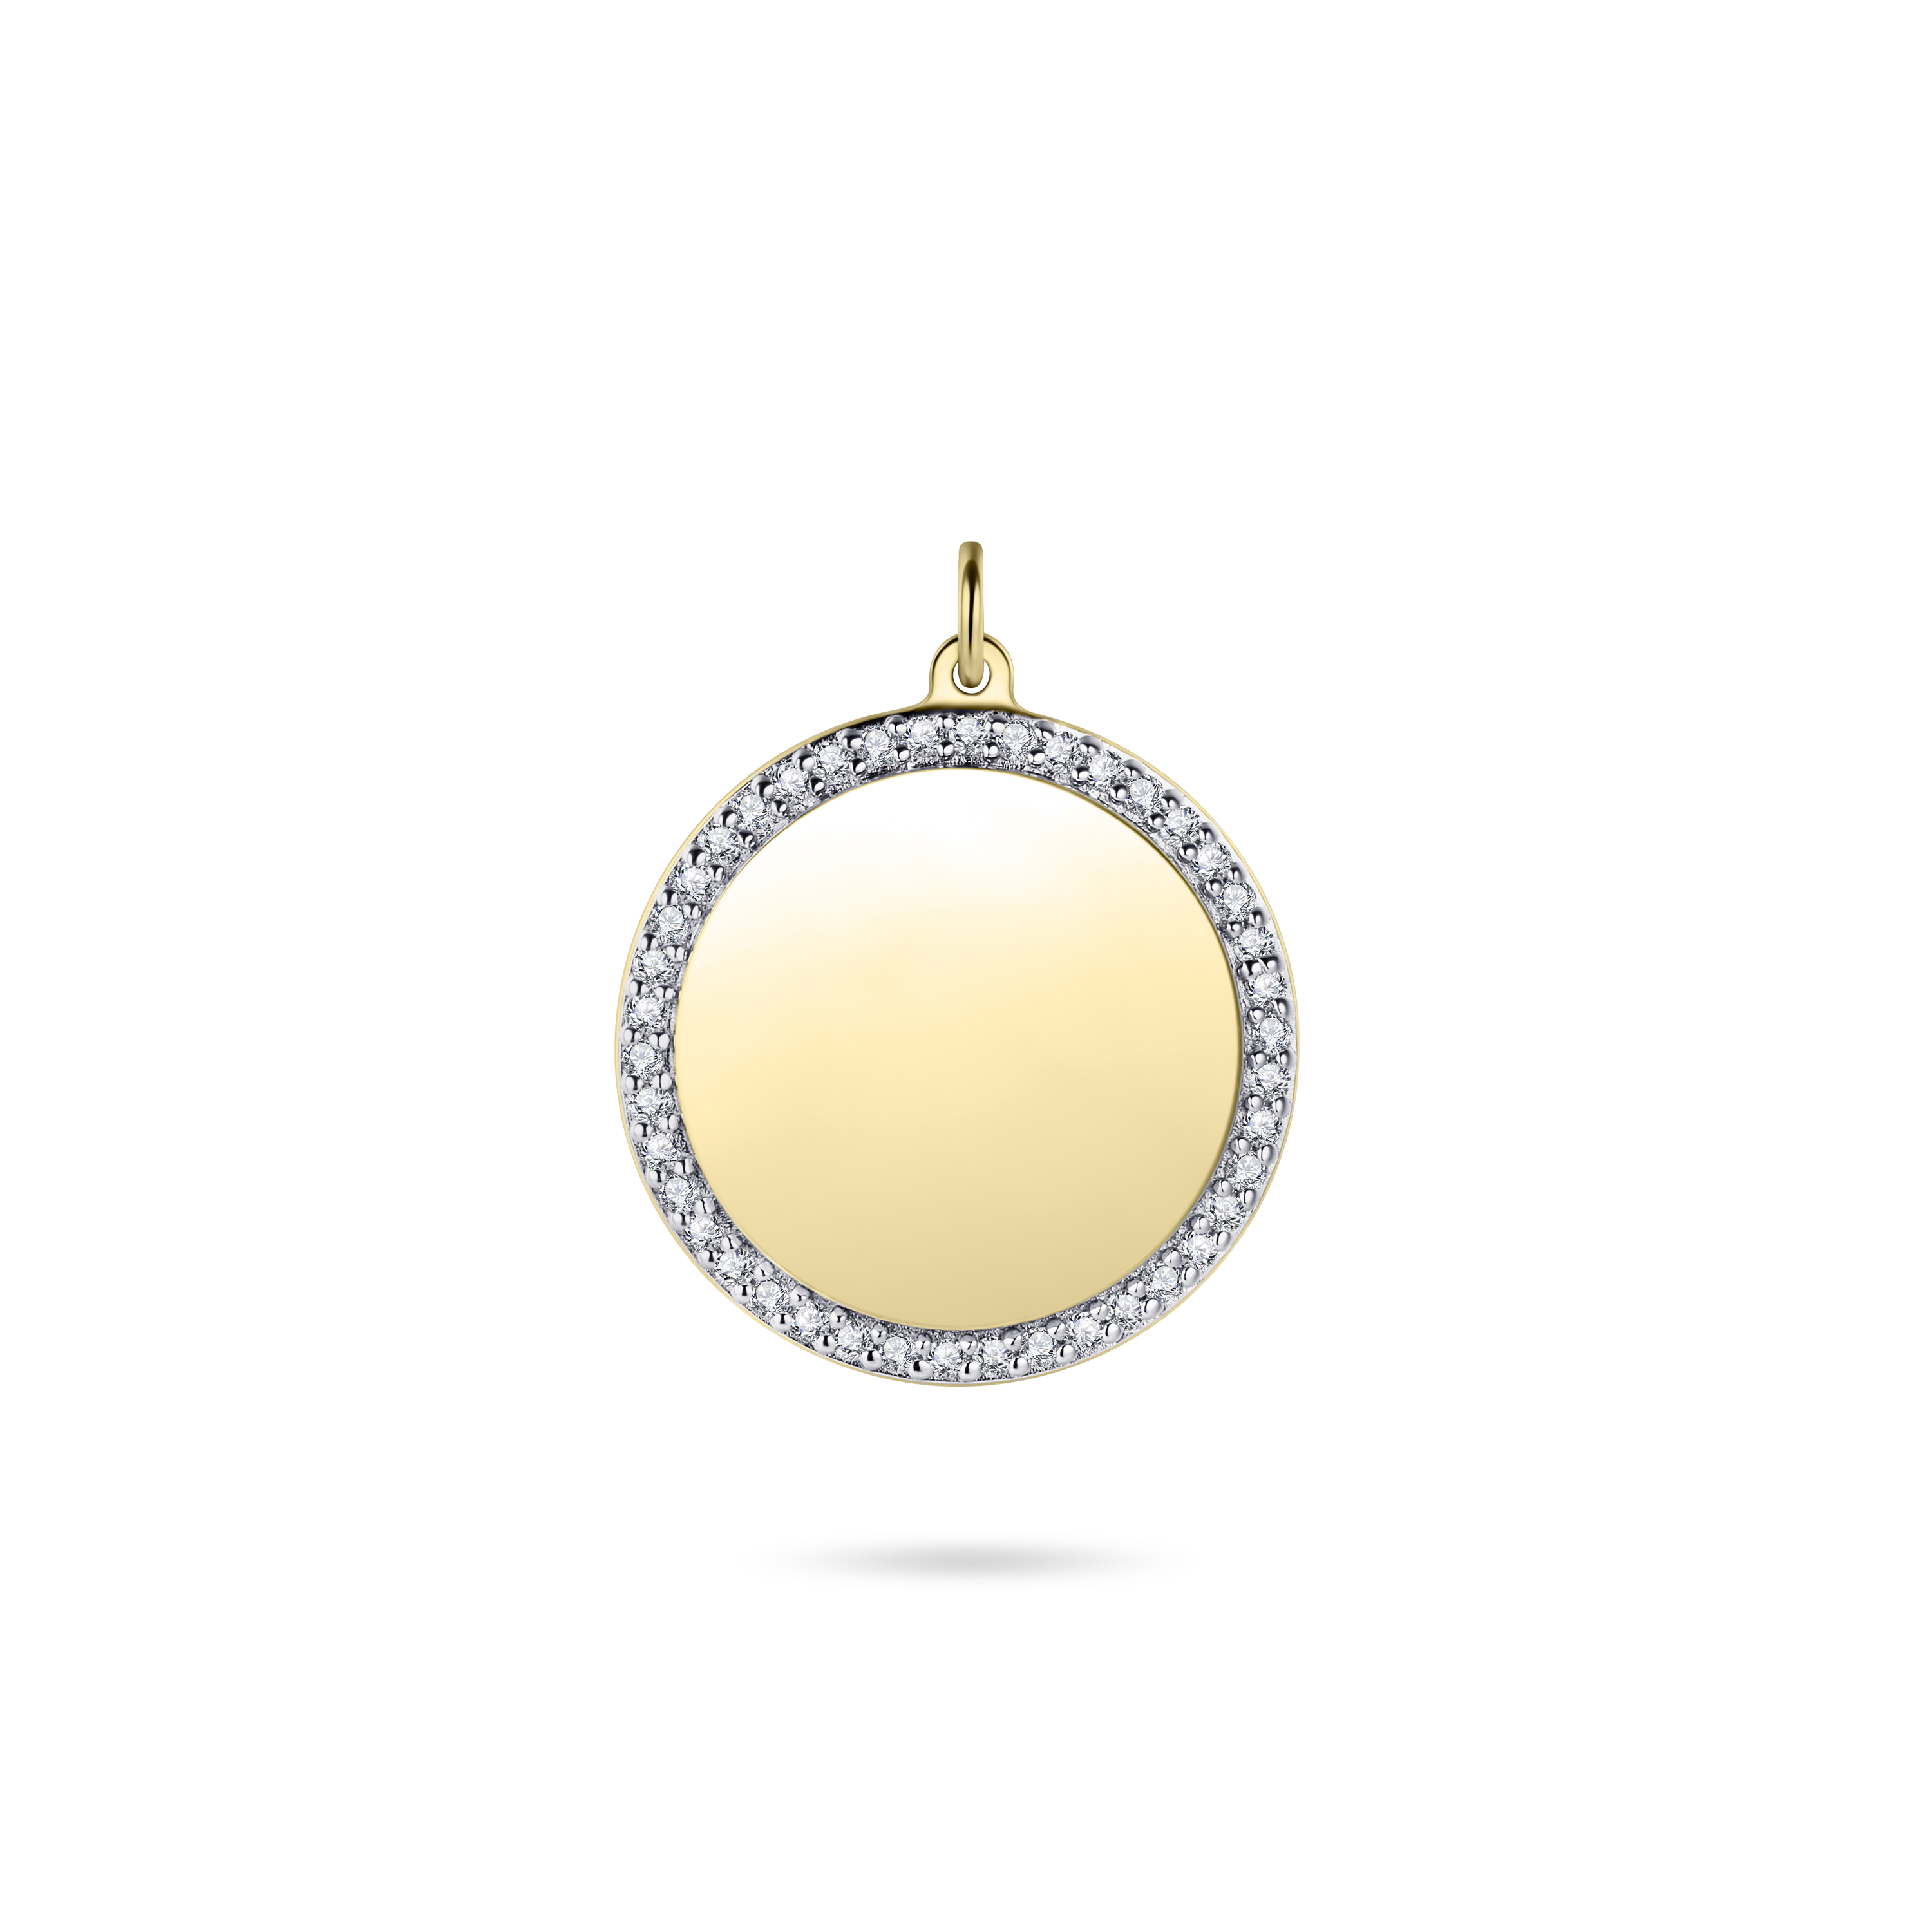 Gisser Jewels Silver Gold Plated Engravable Coin Pendant with Stones